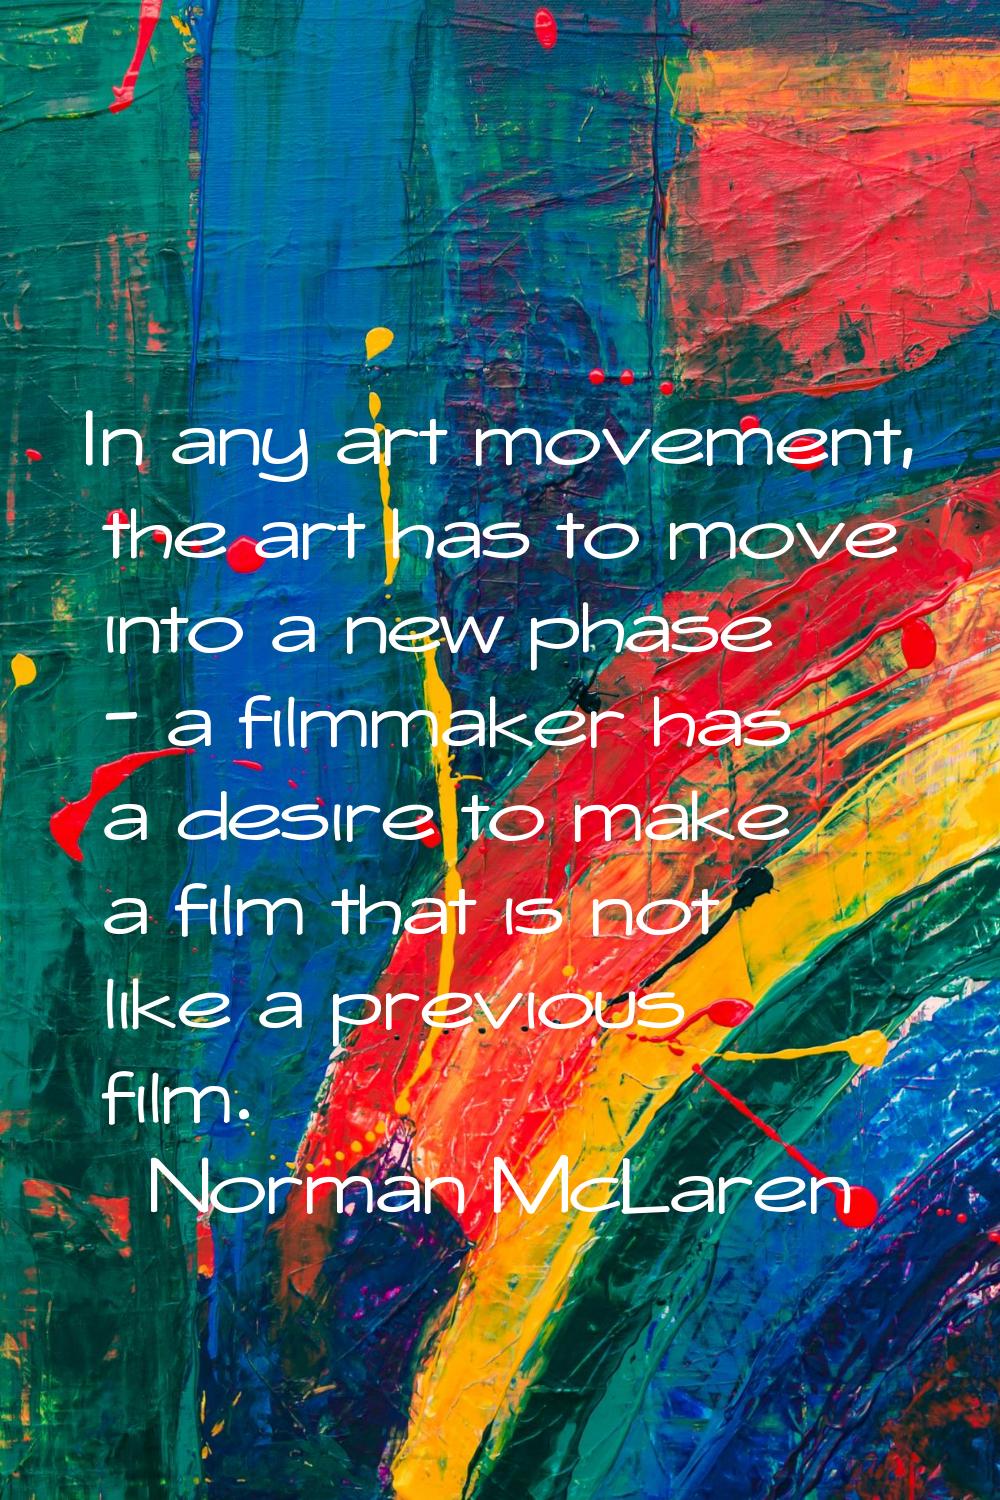 In any art movement, the art has to move into a new phase - a filmmaker has a desire to make a film